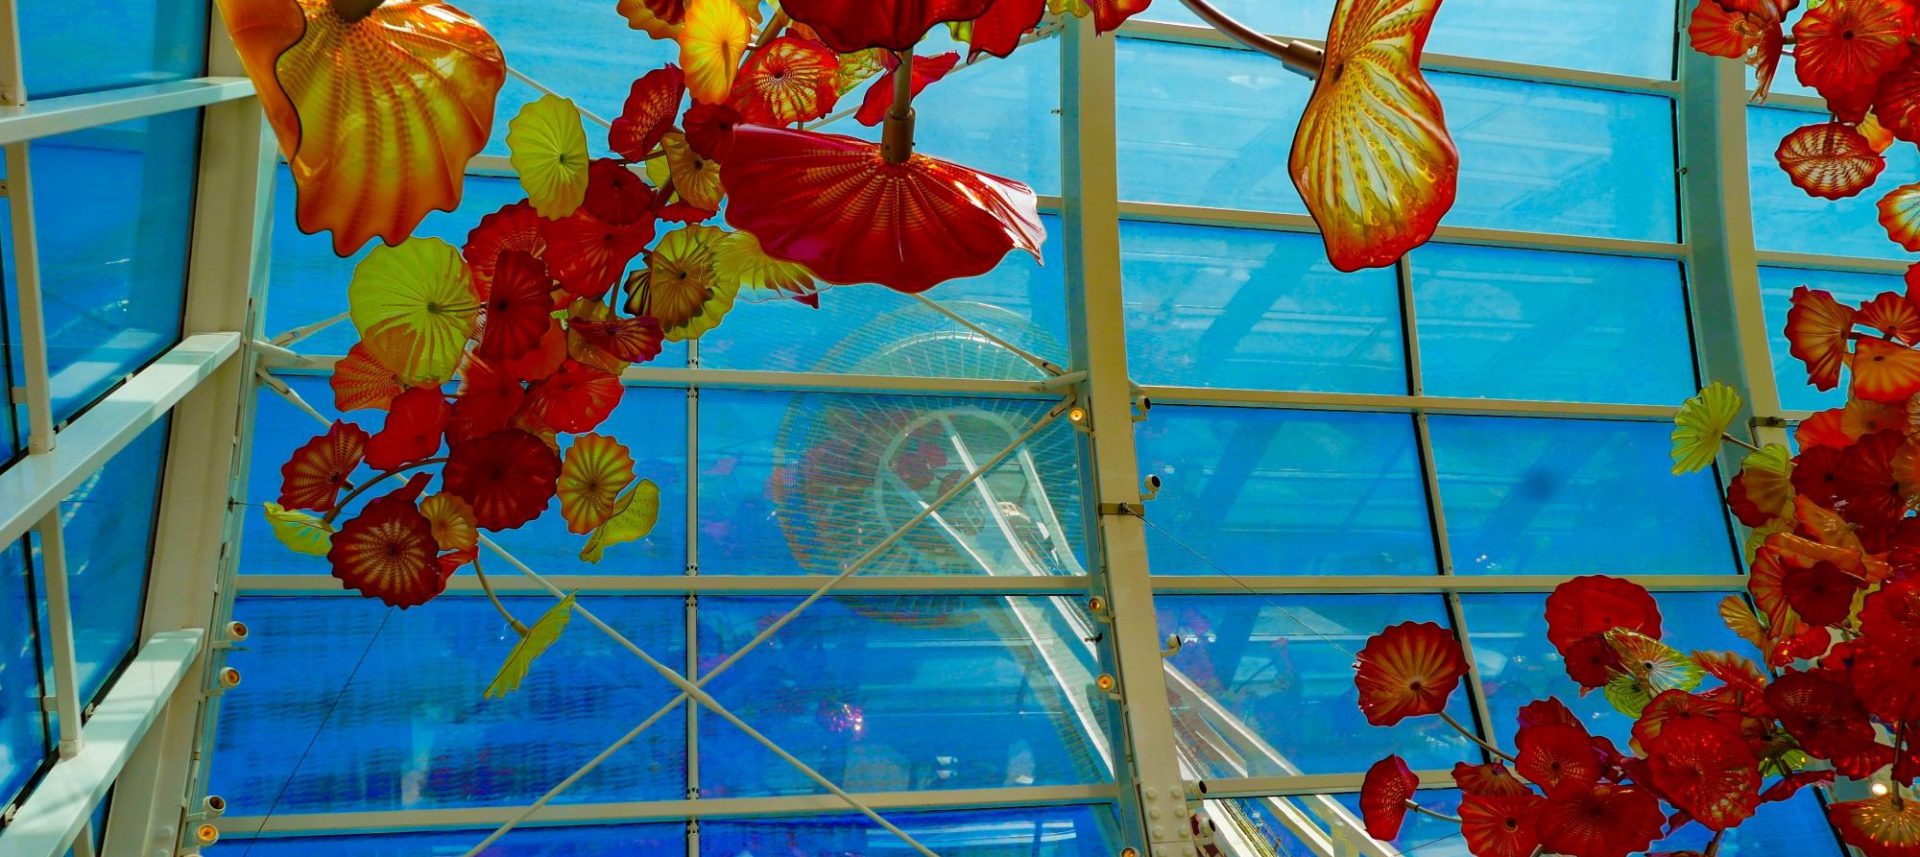 Seattle DMC Chihuly garden and glass